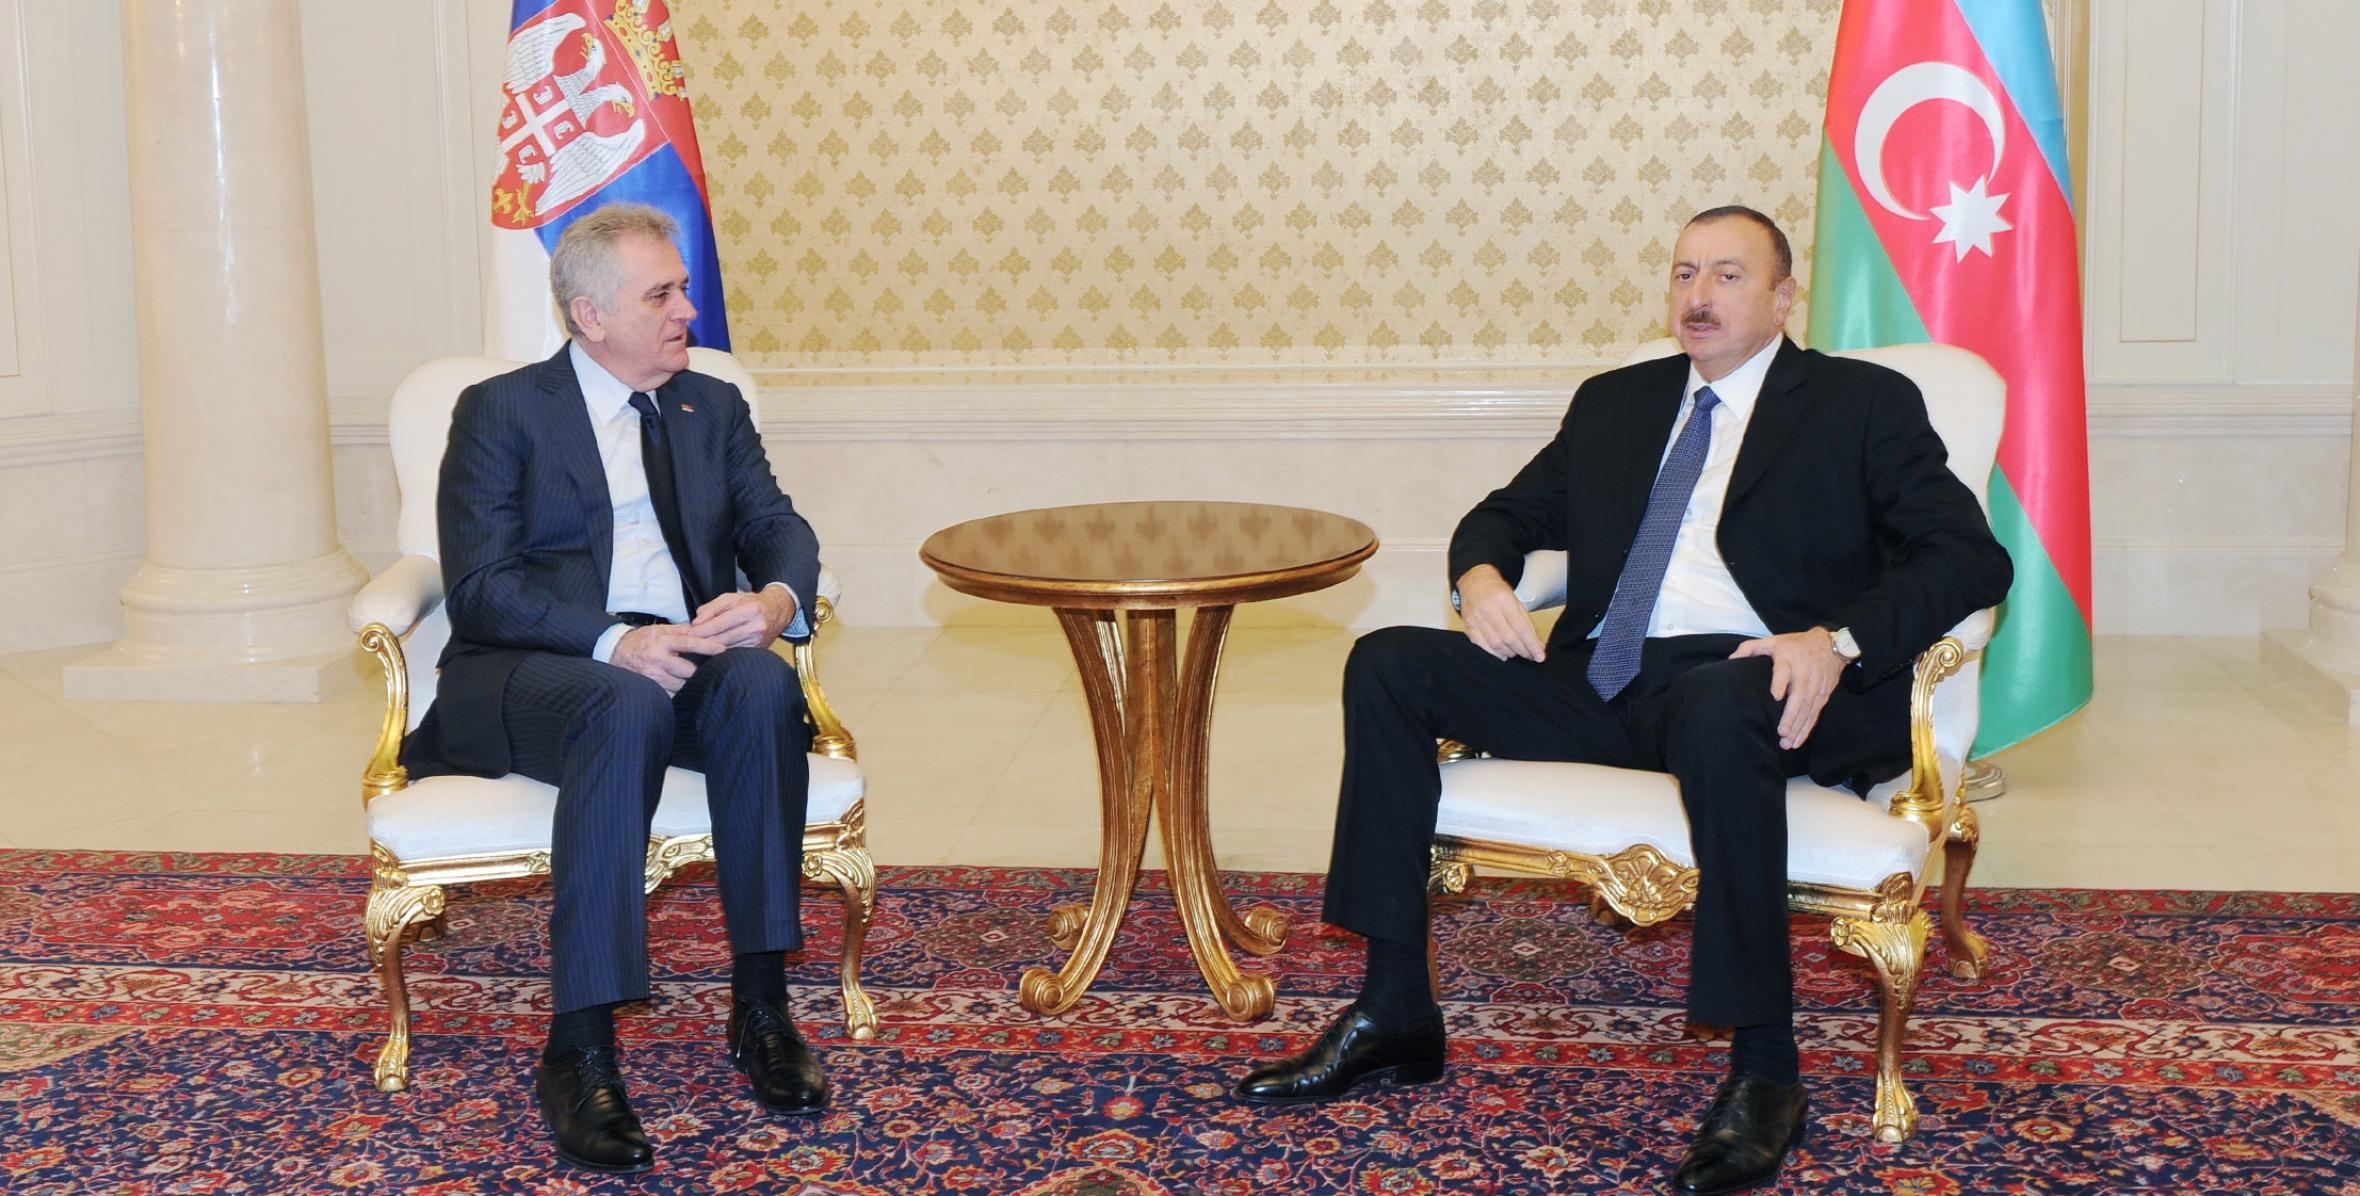 Ilham Aliyev and President of the Republic of Serbia Tomislav Nikolic held a one-on-one meeting